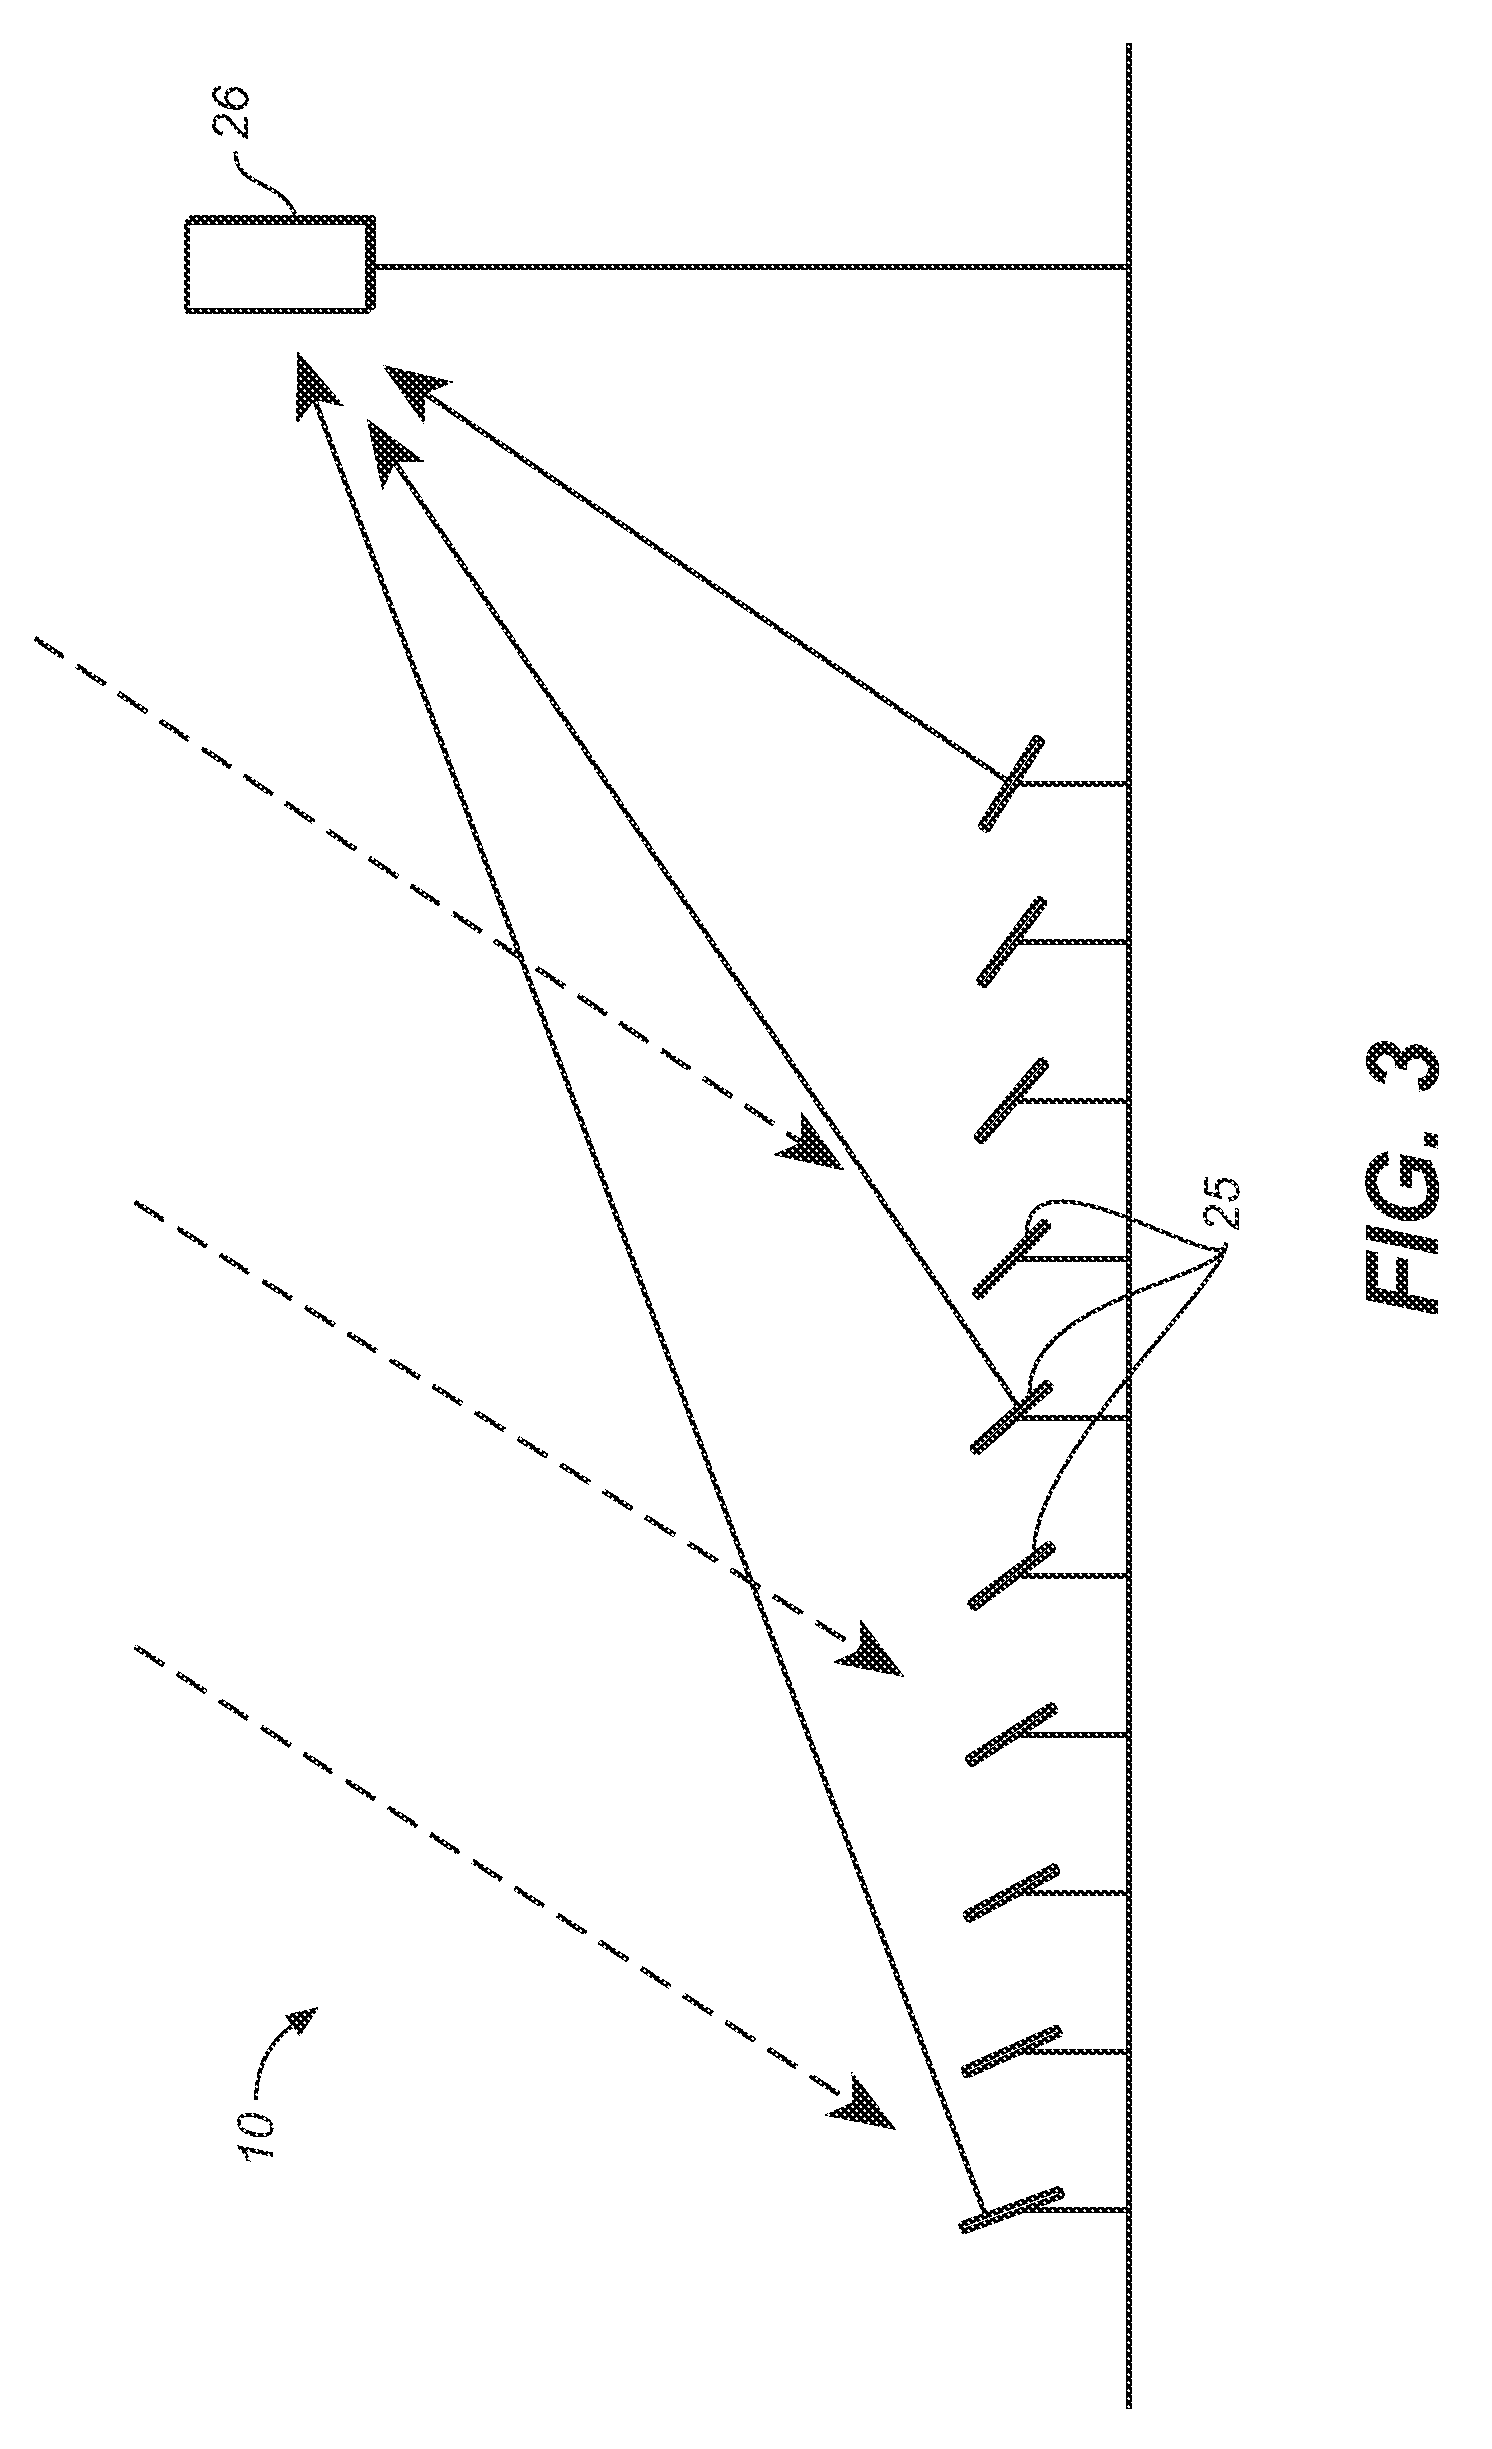 Convective/radiative cooling of condenser coolant